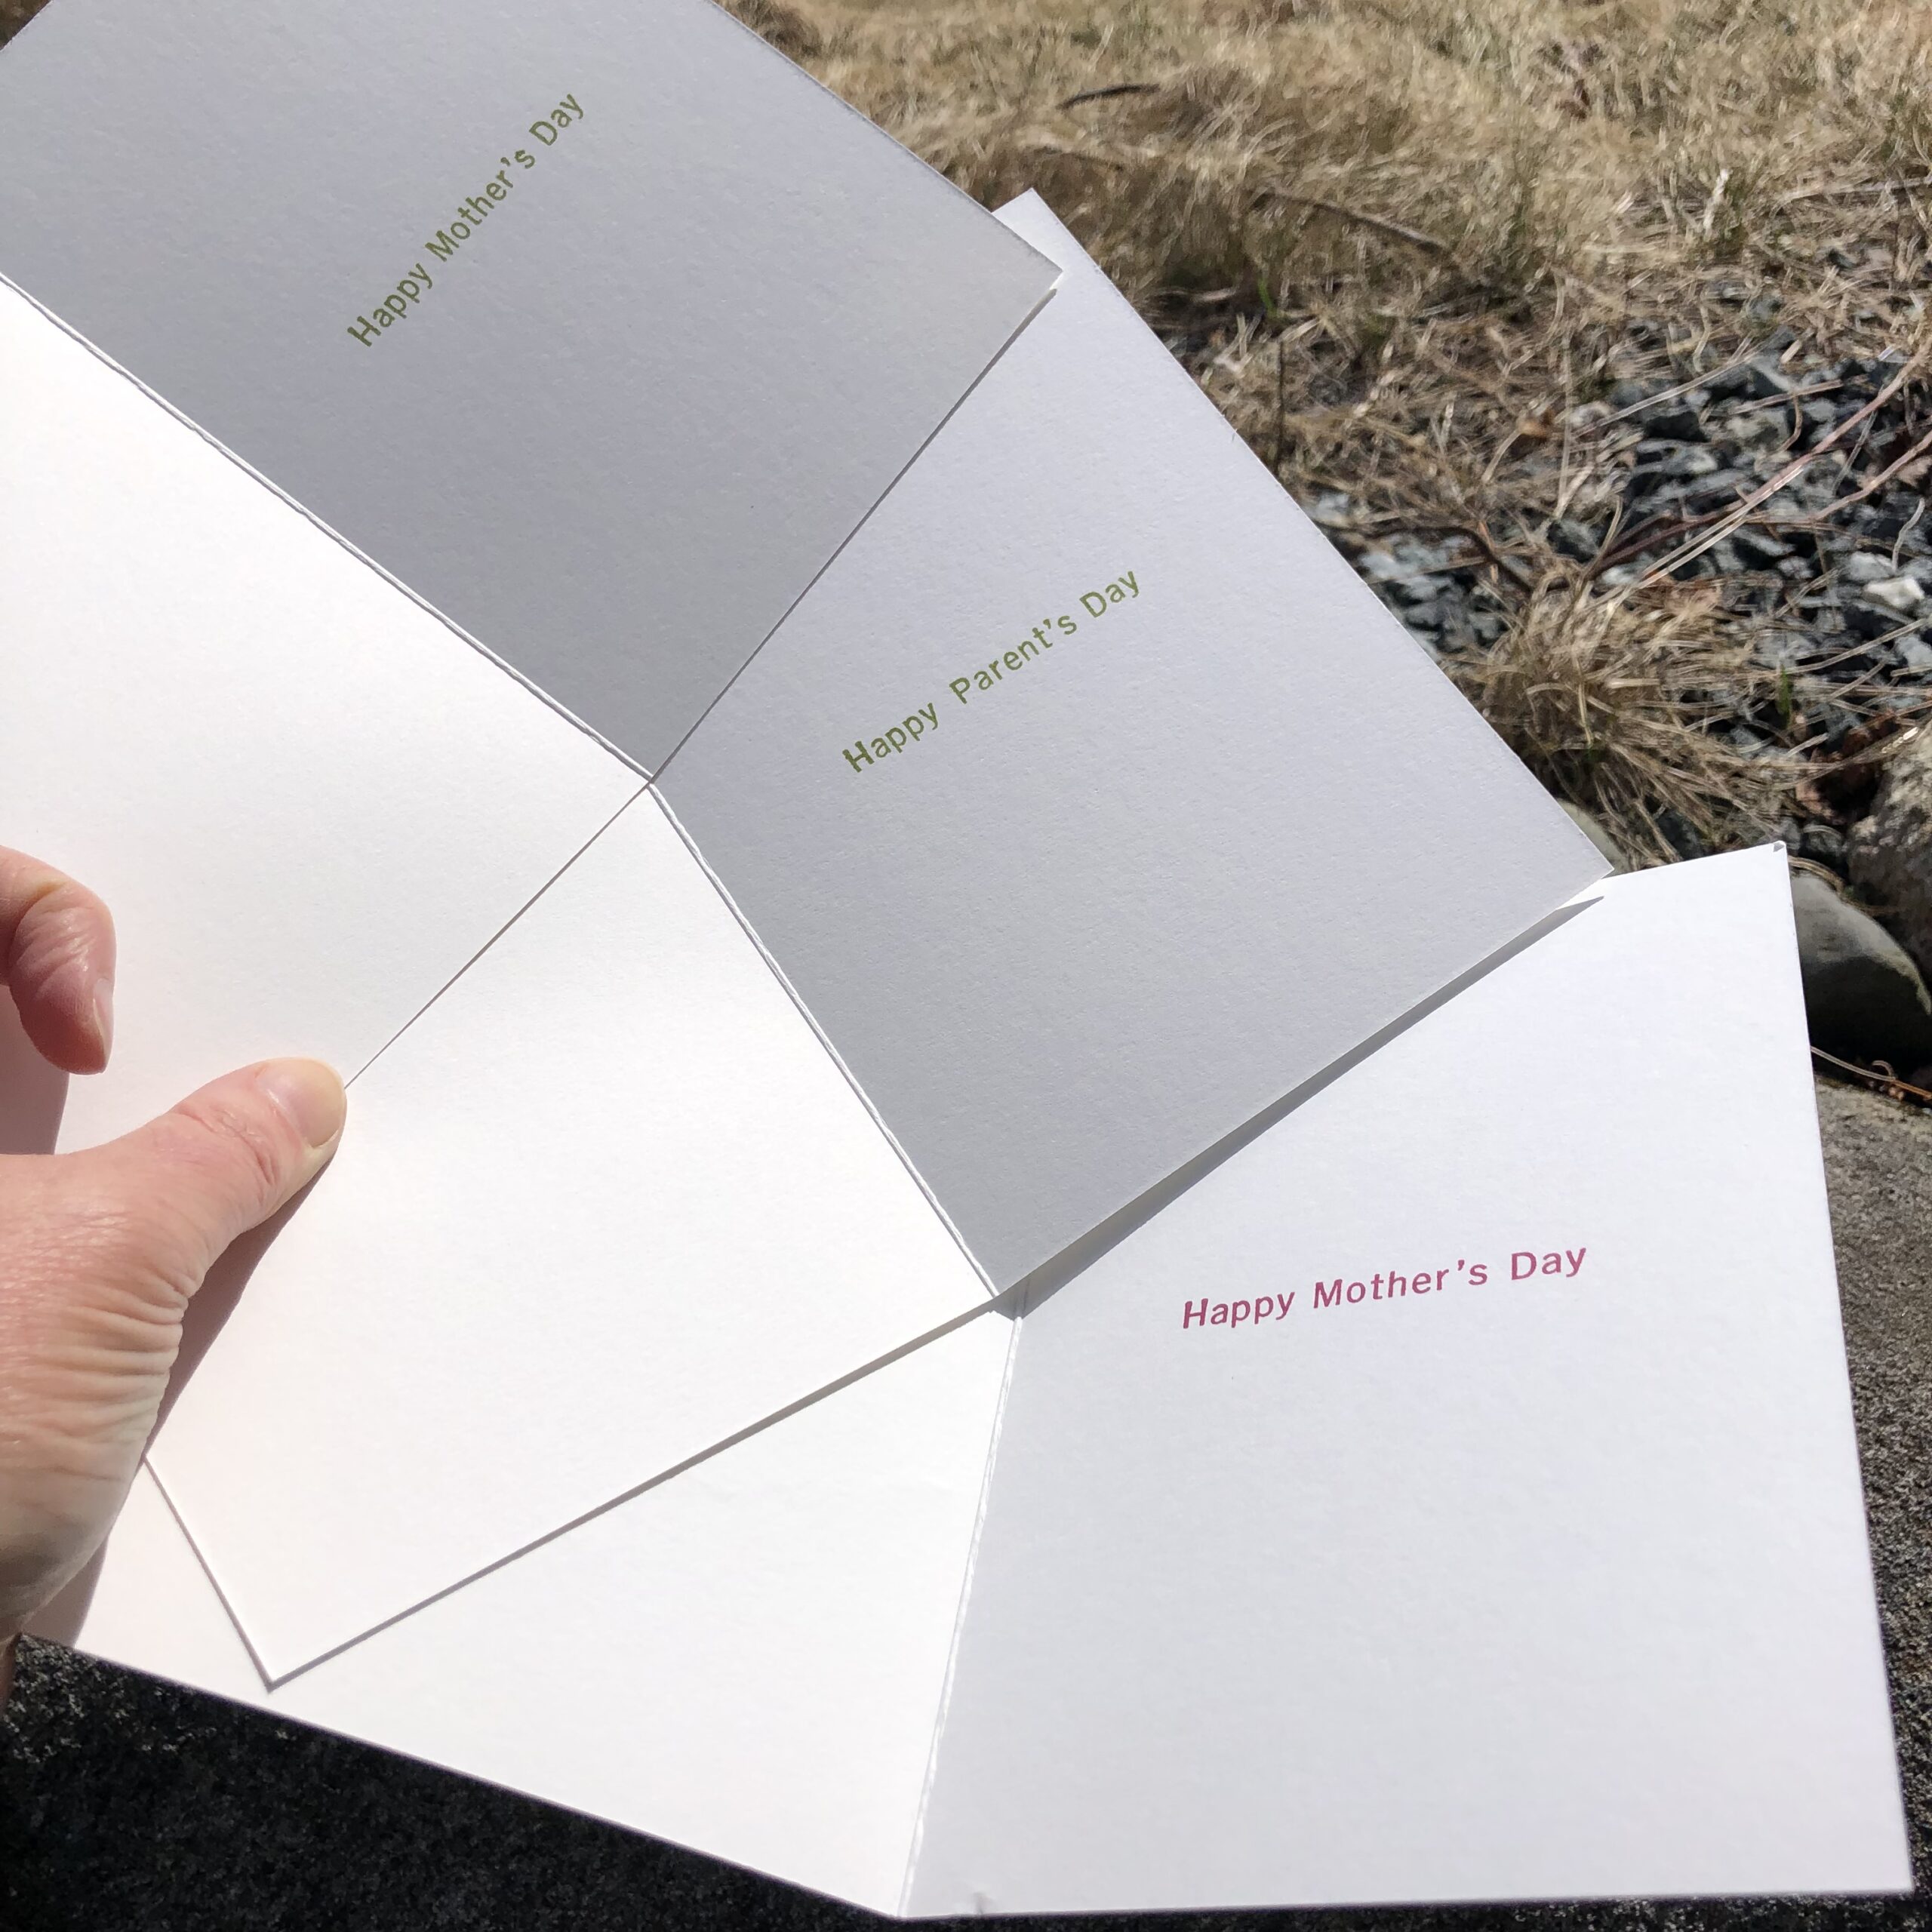 Three white cards open to show the interior messages, “Happy Mother’s Day” and “Happy Parent’s Day” in green ink. (The message in red ink is for the Loon & Chick card, separate listing.)